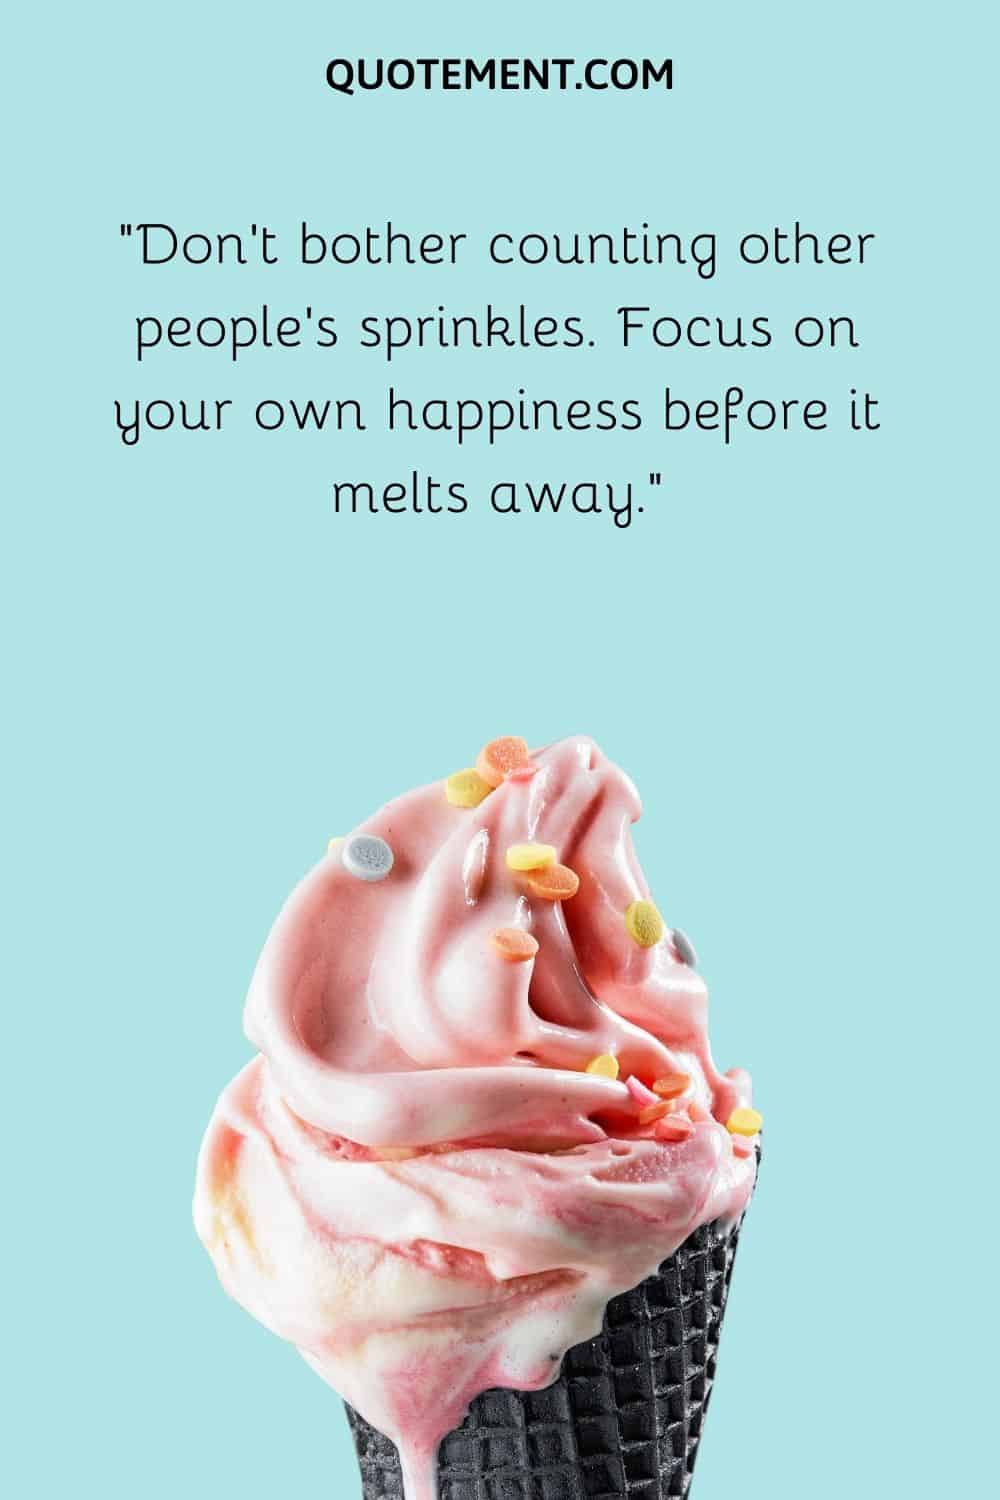 Focus on your own happiness before it melts away